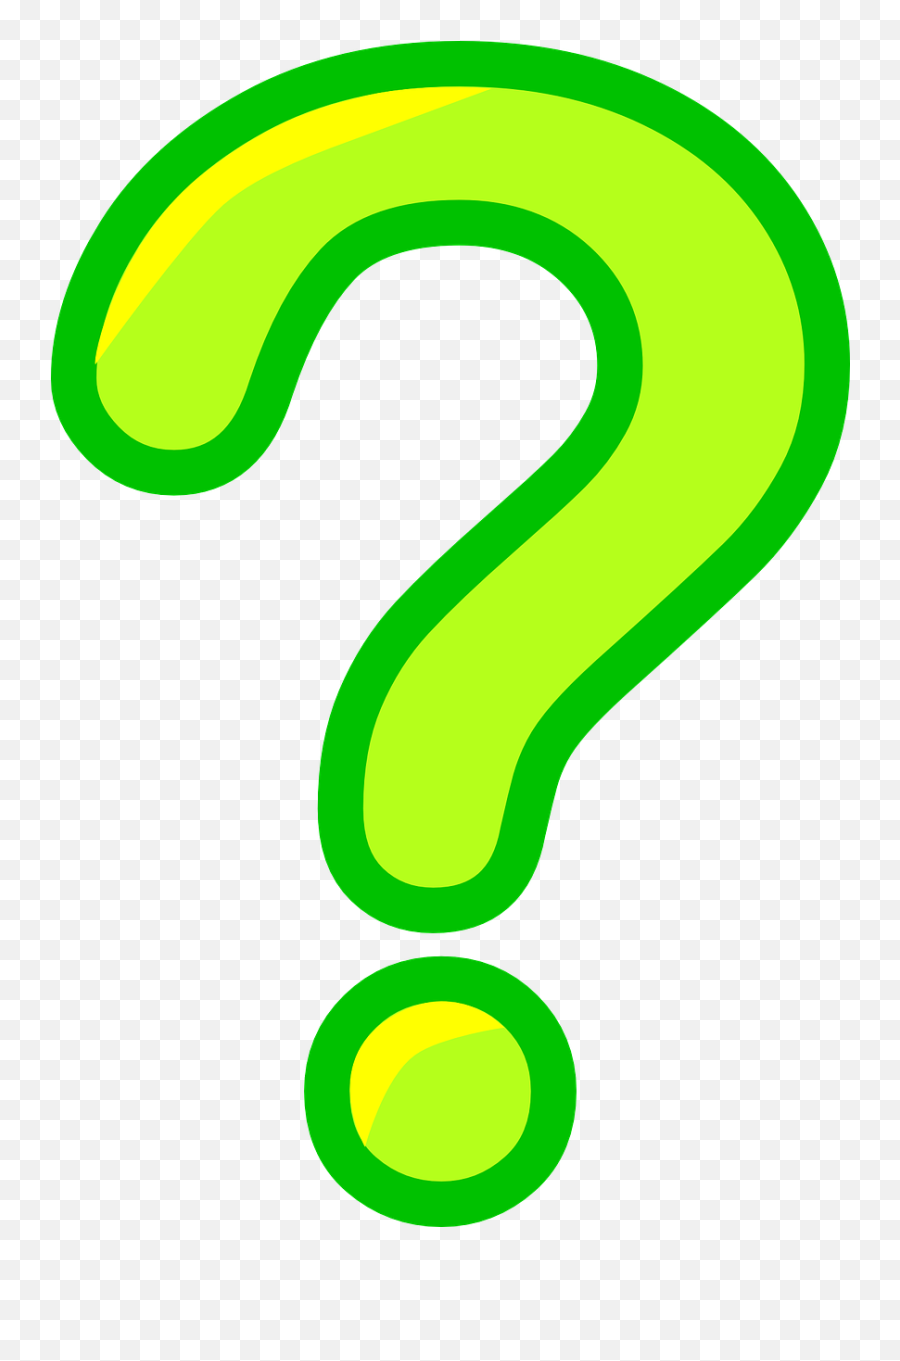 Question Mark Question Punctuation Marks Help Interrogation - Animated Question Mark Transparent Background Emoji,Question Mark In A Box Emoji